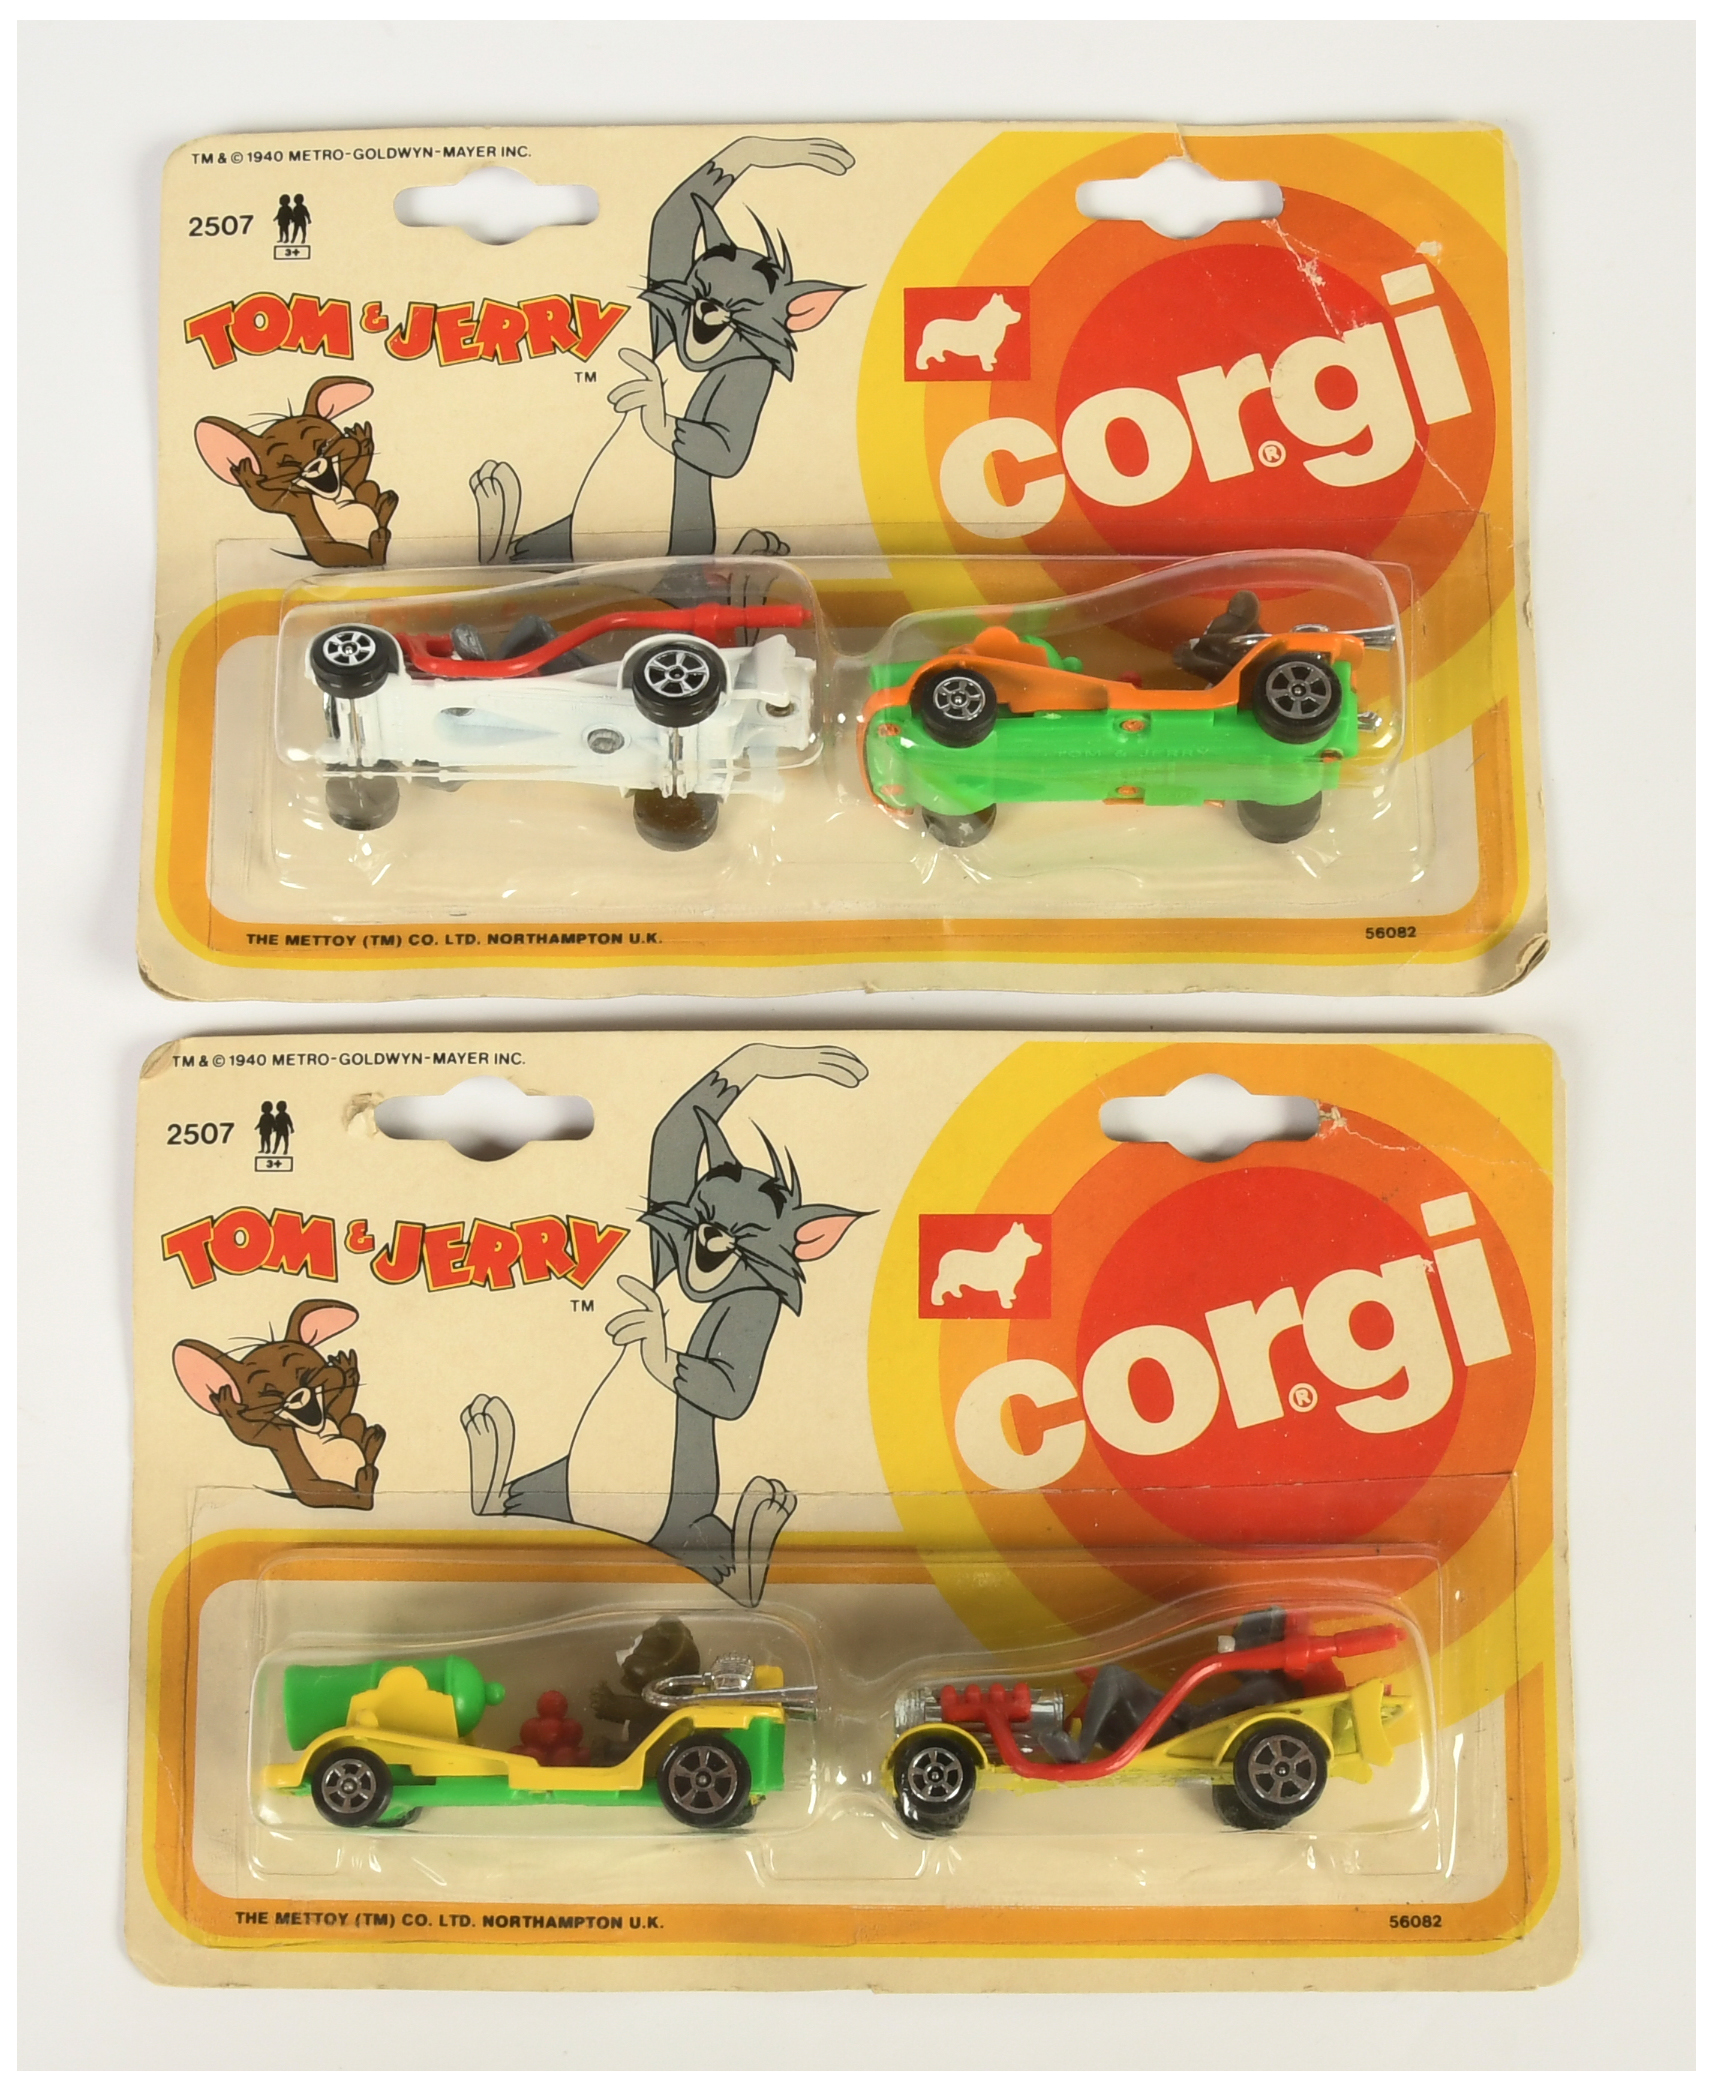 Corgi Juniors 2507 "Tom & Jerry" Twin Packs A Pair (1) - Jerry's car - Orange, green base and can...